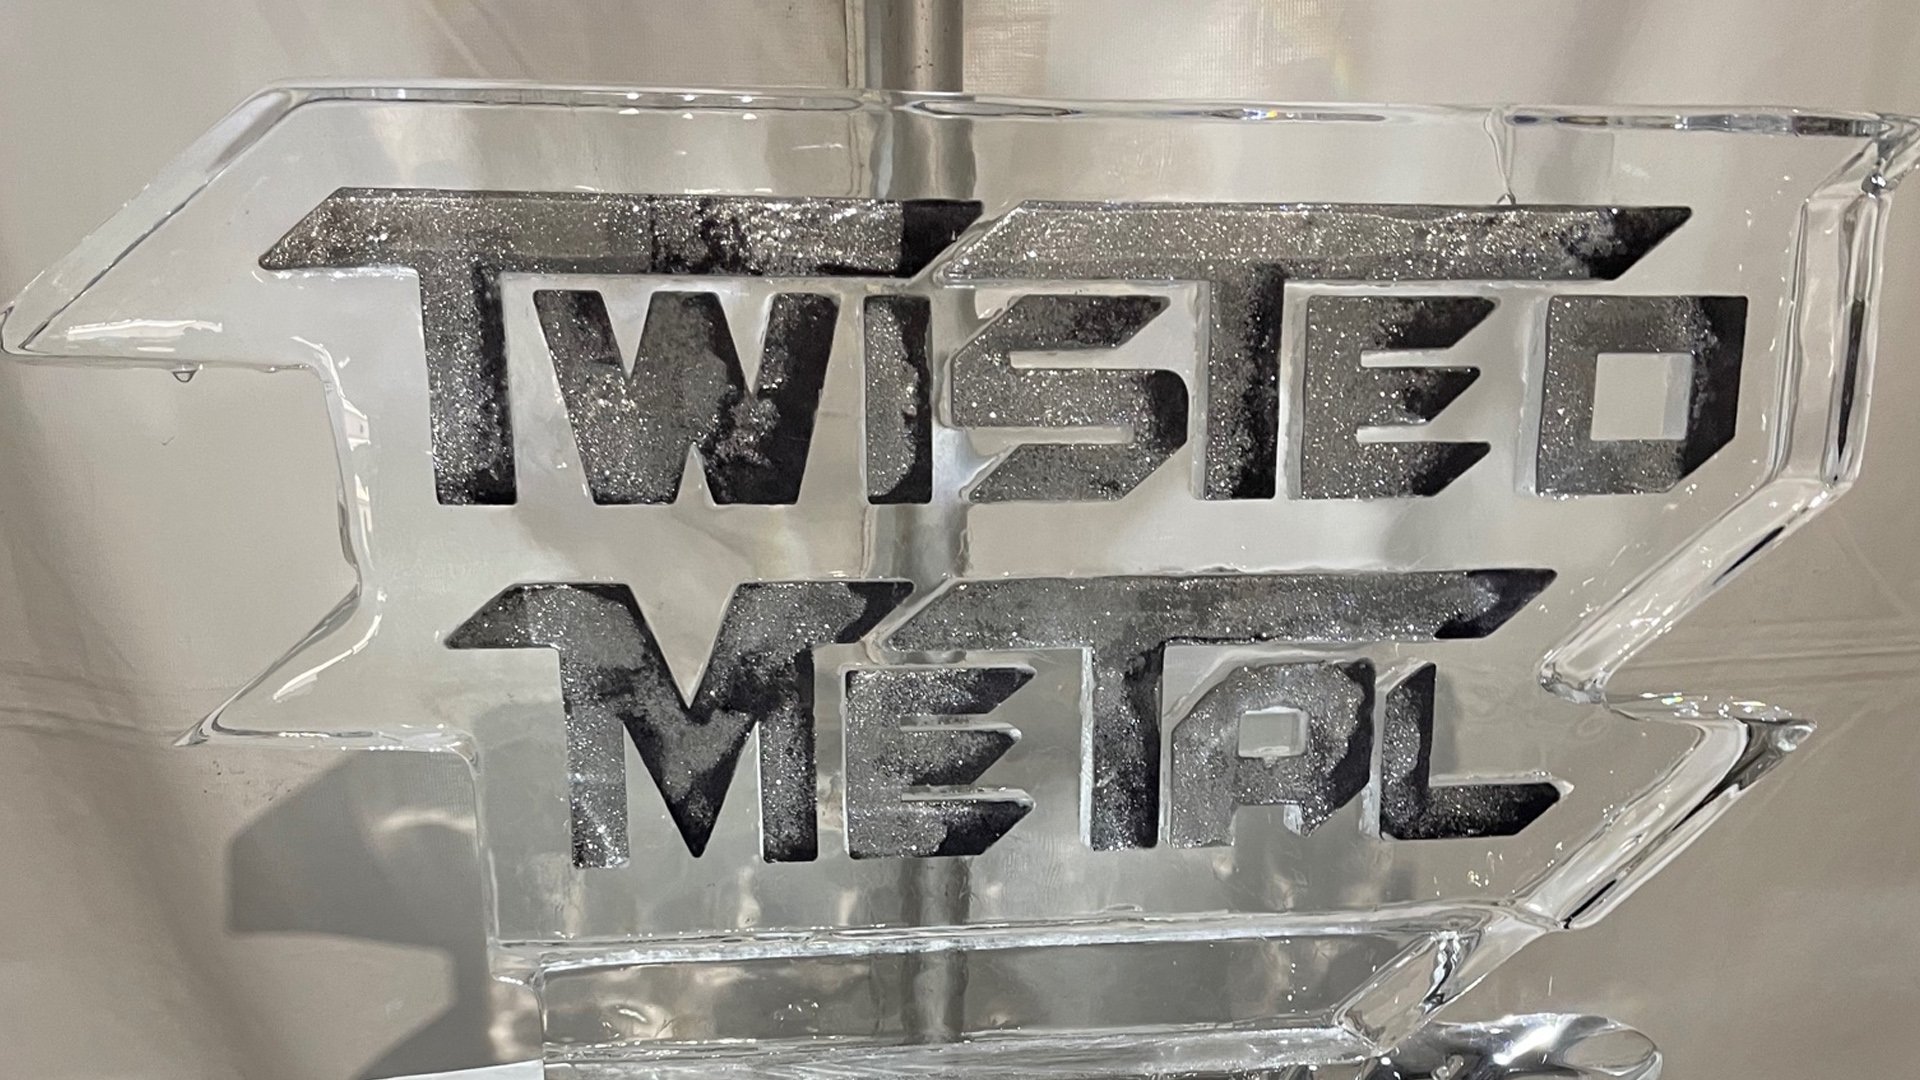 Review: 'Twisted Metal' Runs on Empty